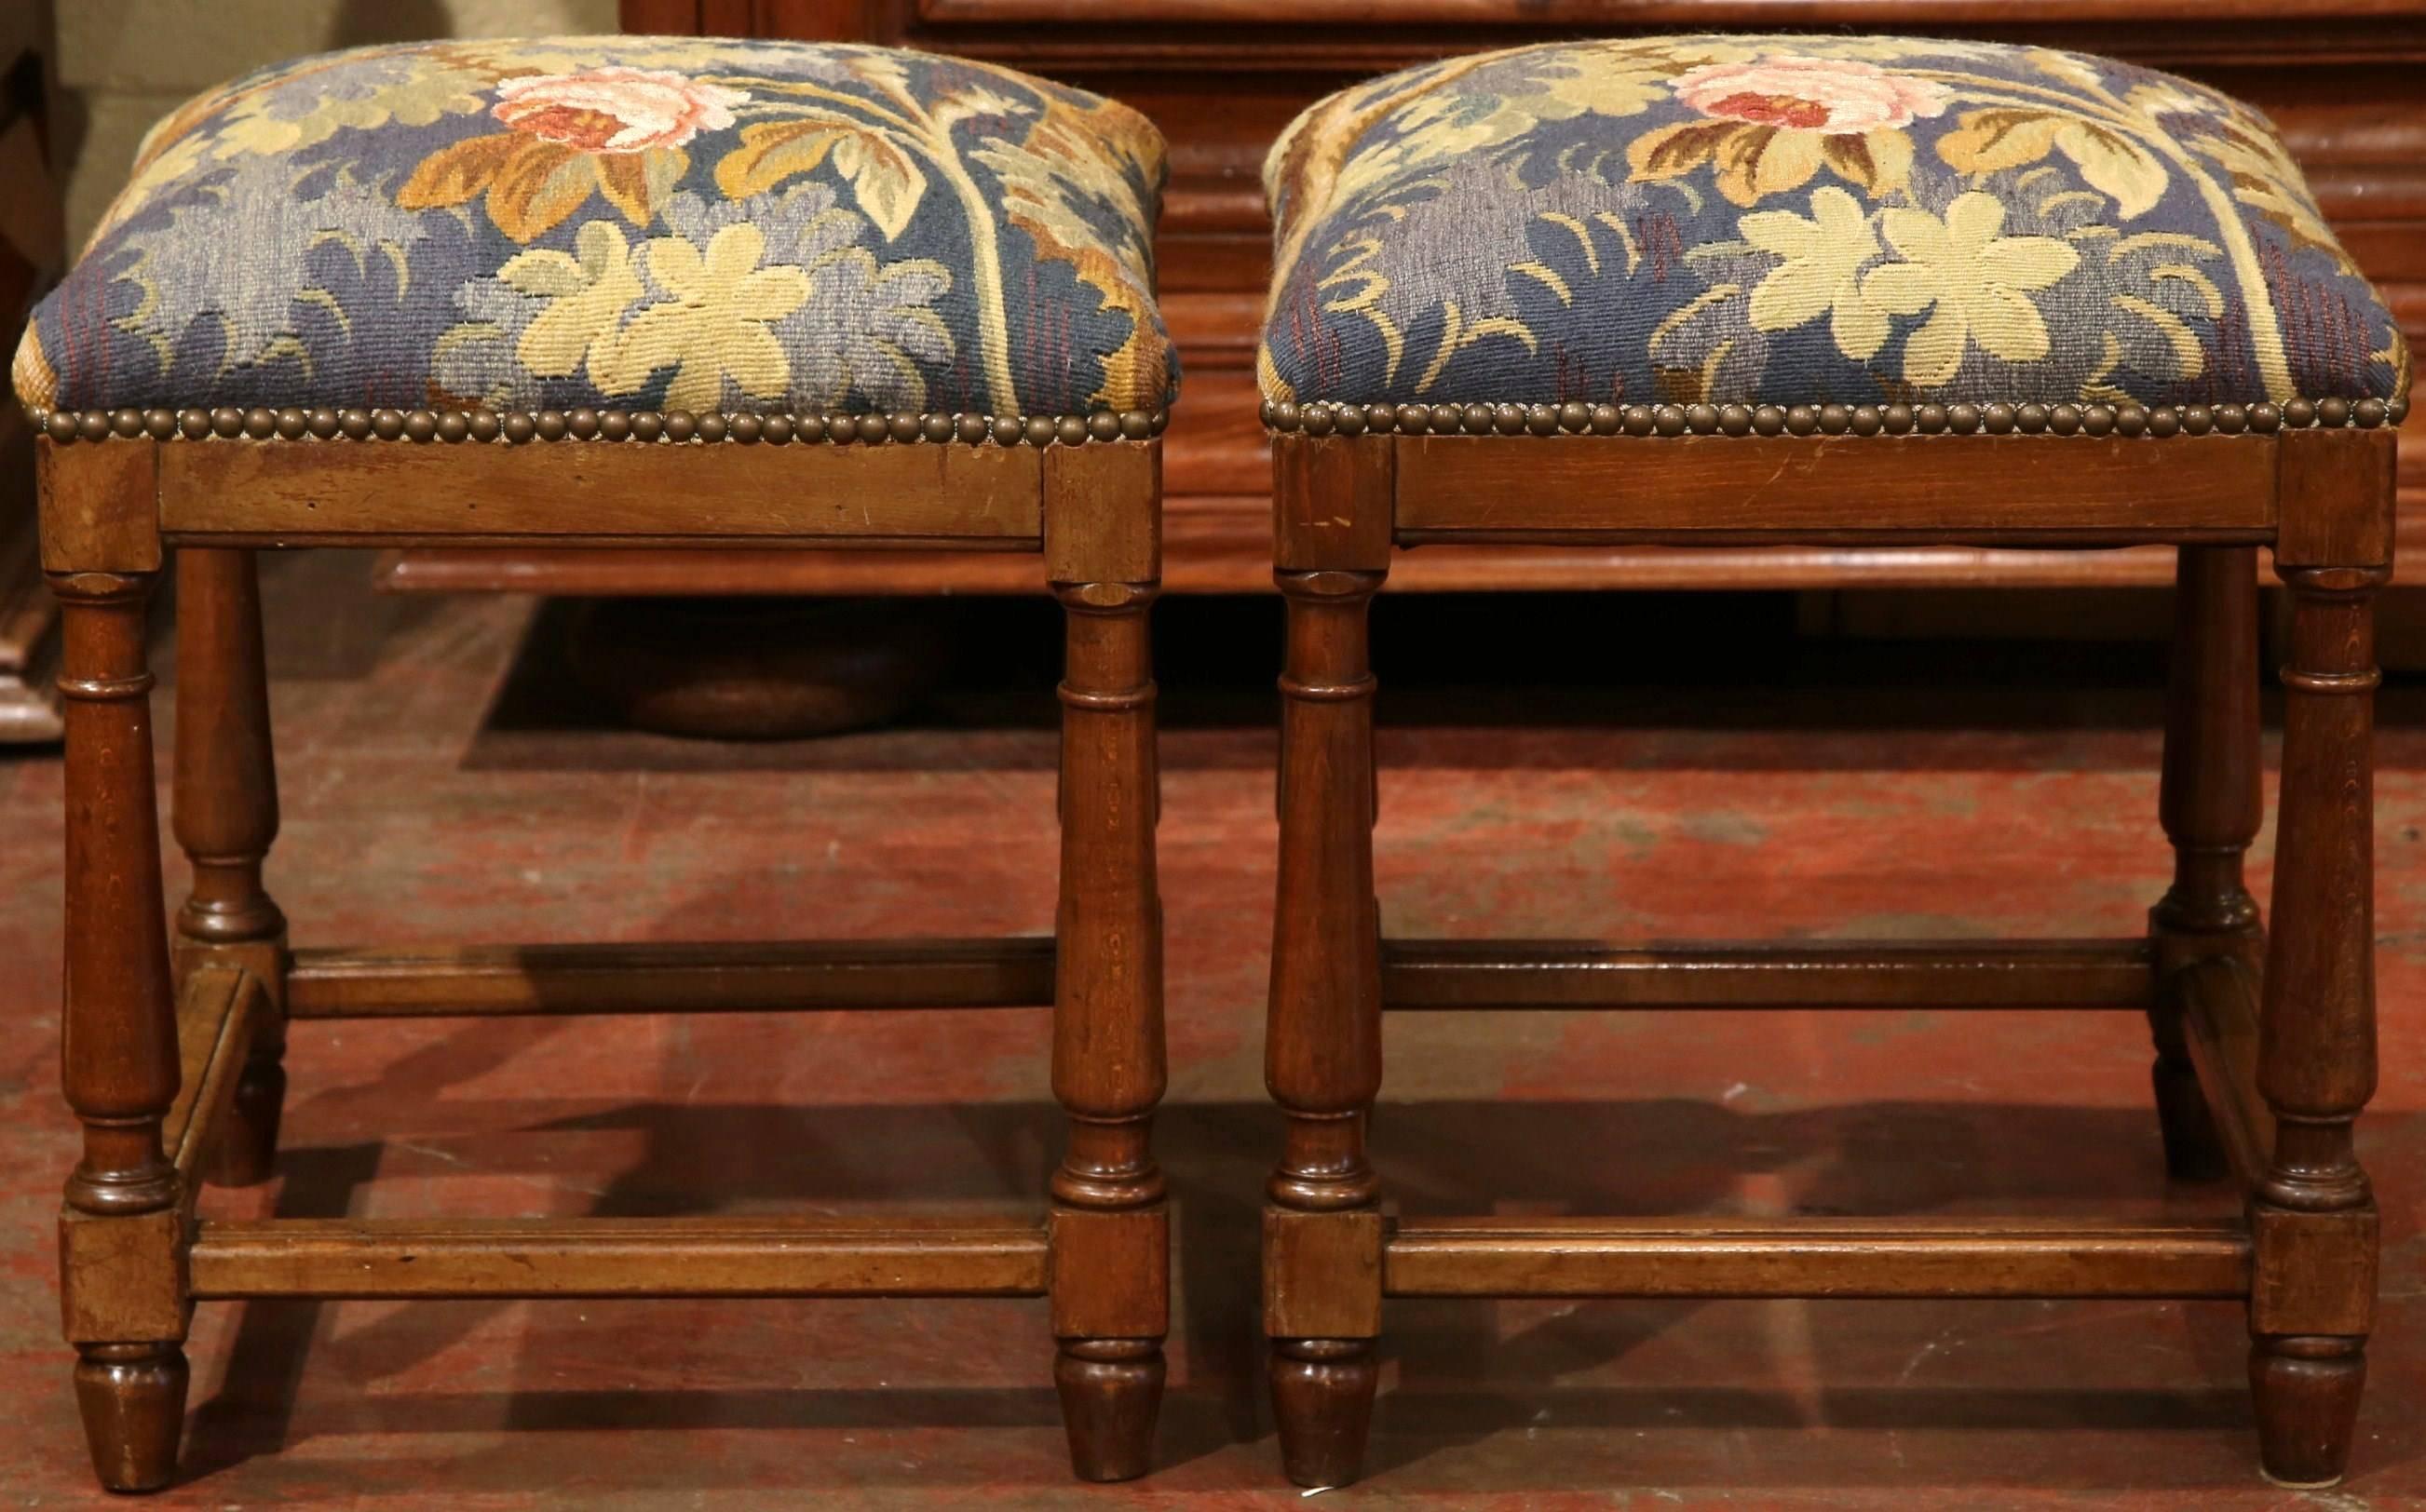 Complete your formal living room with this elegant pair of antique stools from France, circa 1840. Upholstered with a colorful, handwoven 19th century verdure Aubusson tapestry, these stools complement a variety of styles from traditional to